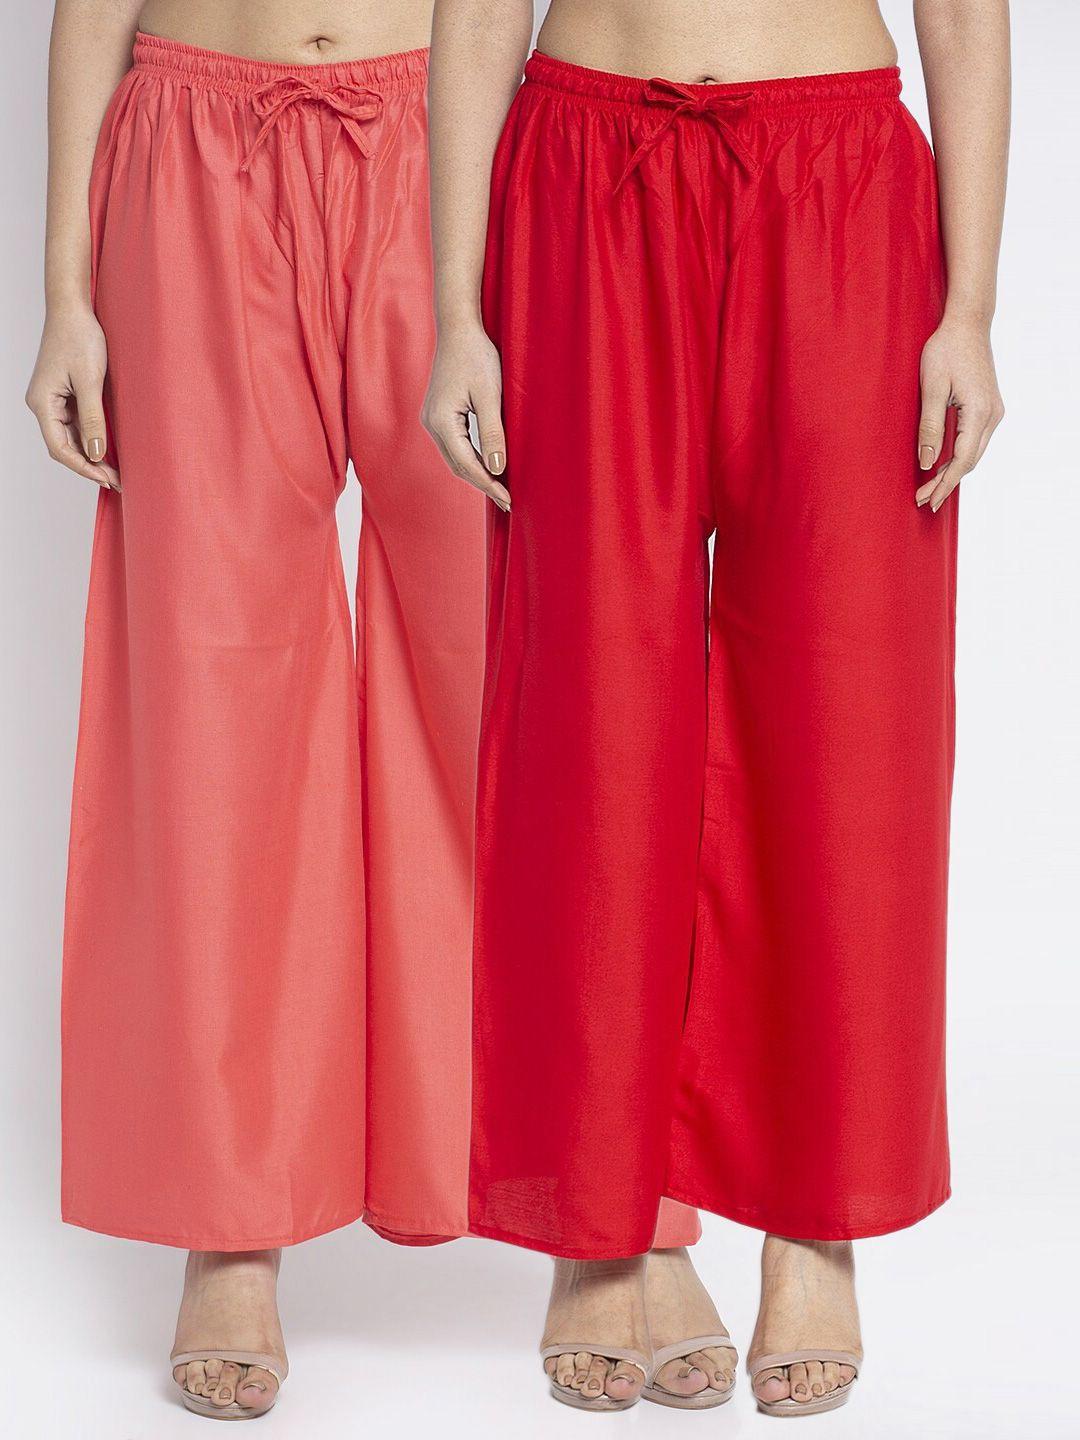 gracit-women-pack-of-2-red-&-peach-coloured-ethnic-palazzos